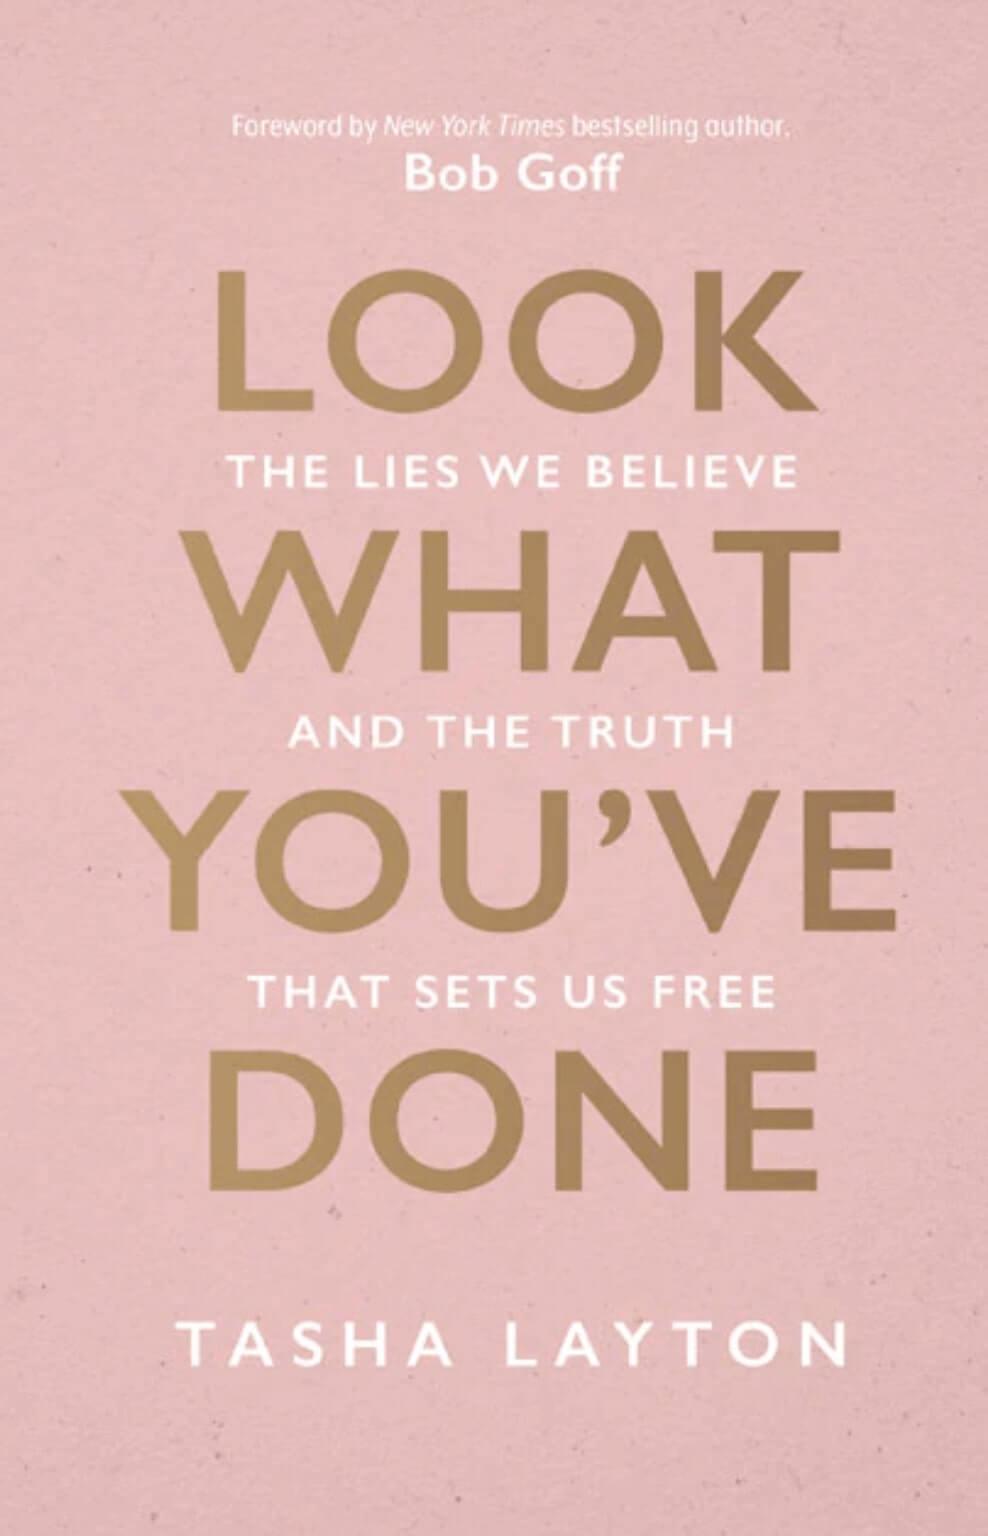 Cover of the book "Look What You've Done: The Lies We Believe and the Truth That Sets Us Free"